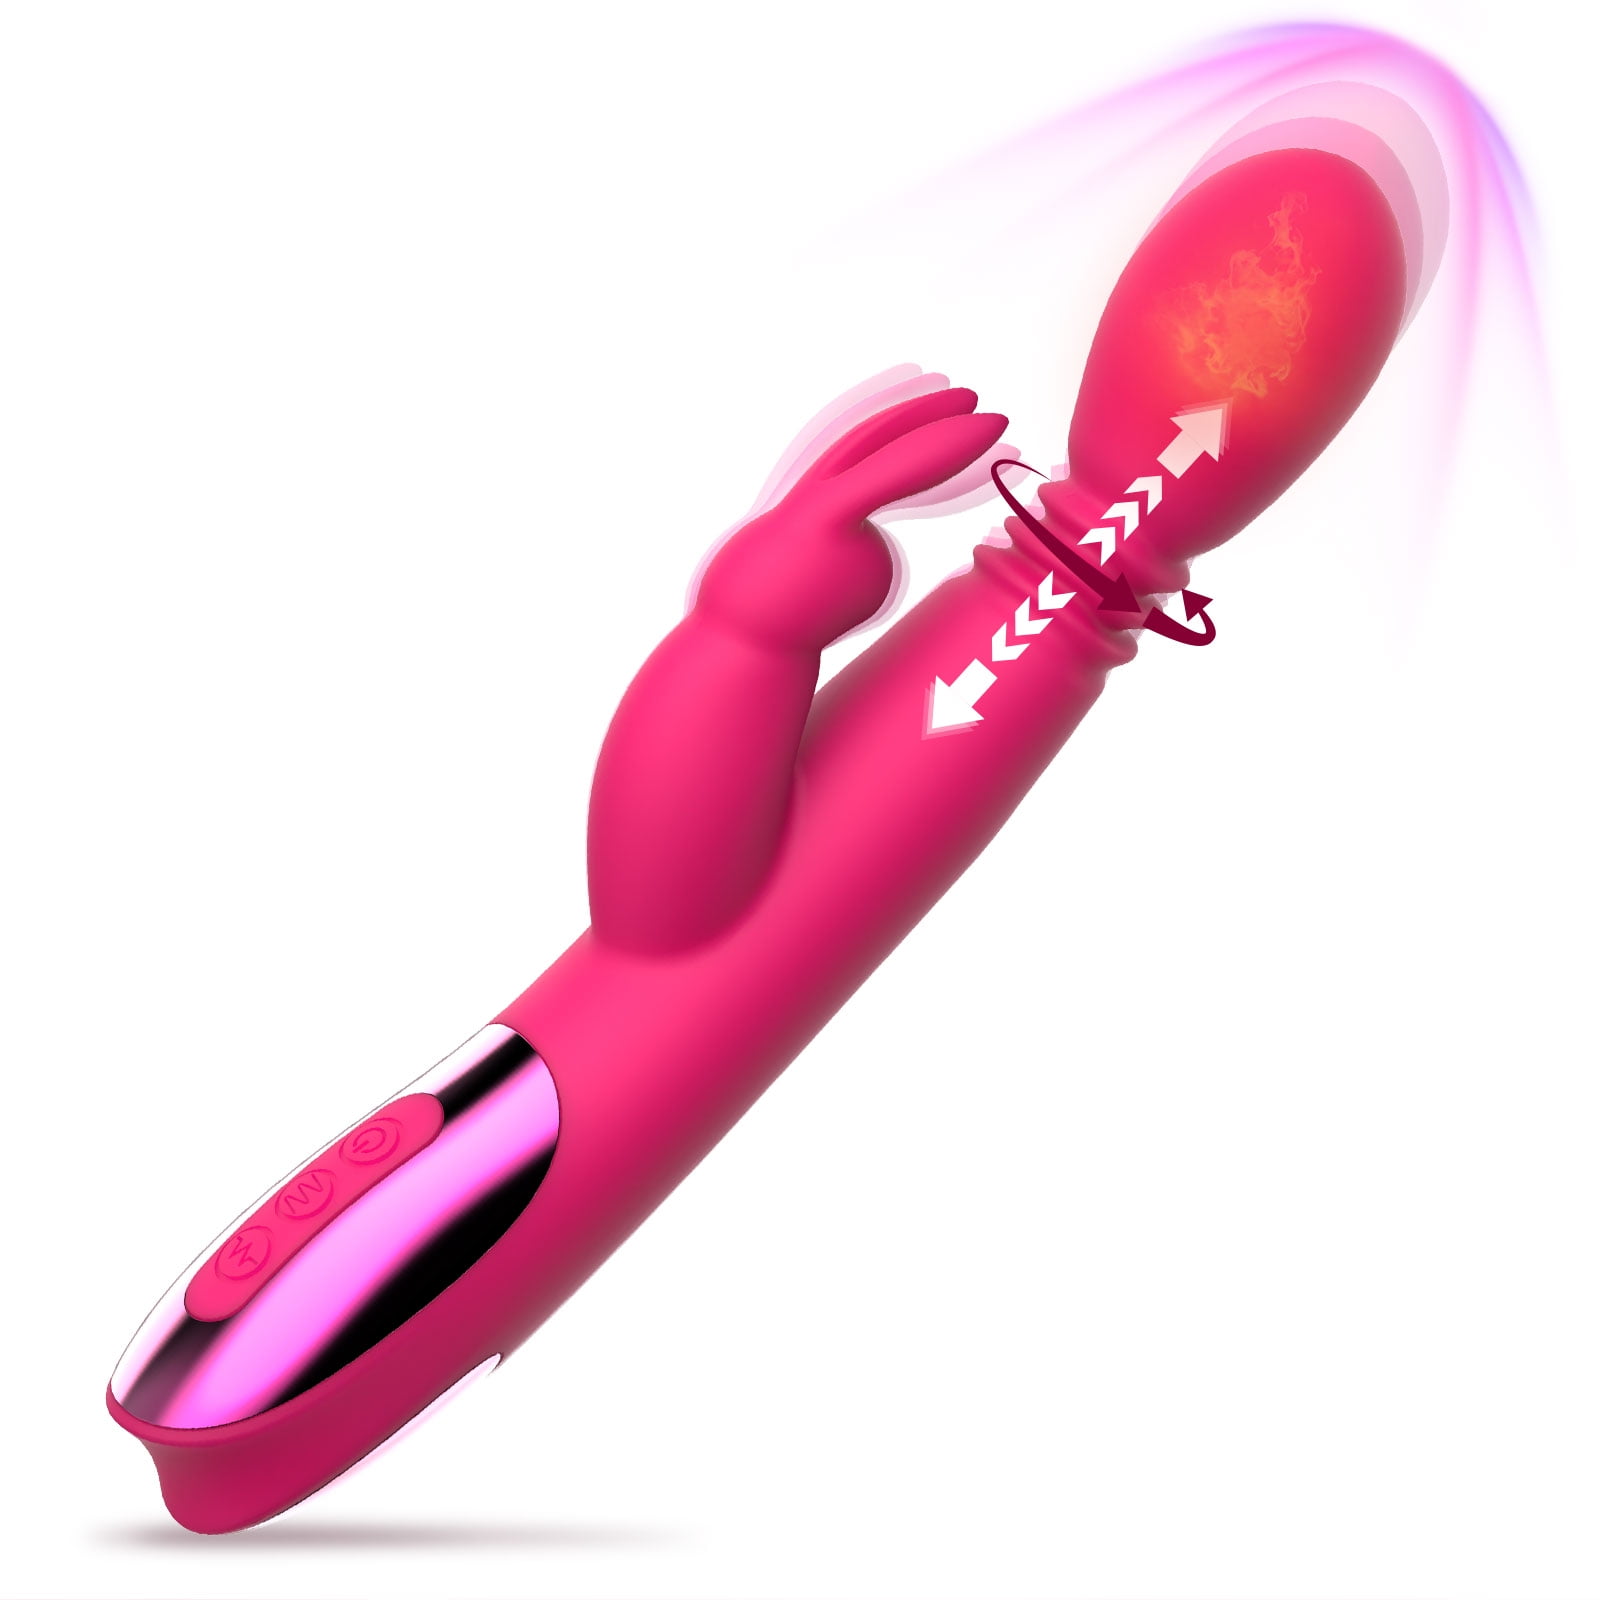 Blissmakers Thrusting Dildo Rabbit Vibrator Adult Sex Toys with Heating Function, 3 Thrusting and Rotating and 10 Tapping Vibrating G Spot Dual Motor Stimulator for Women Couple